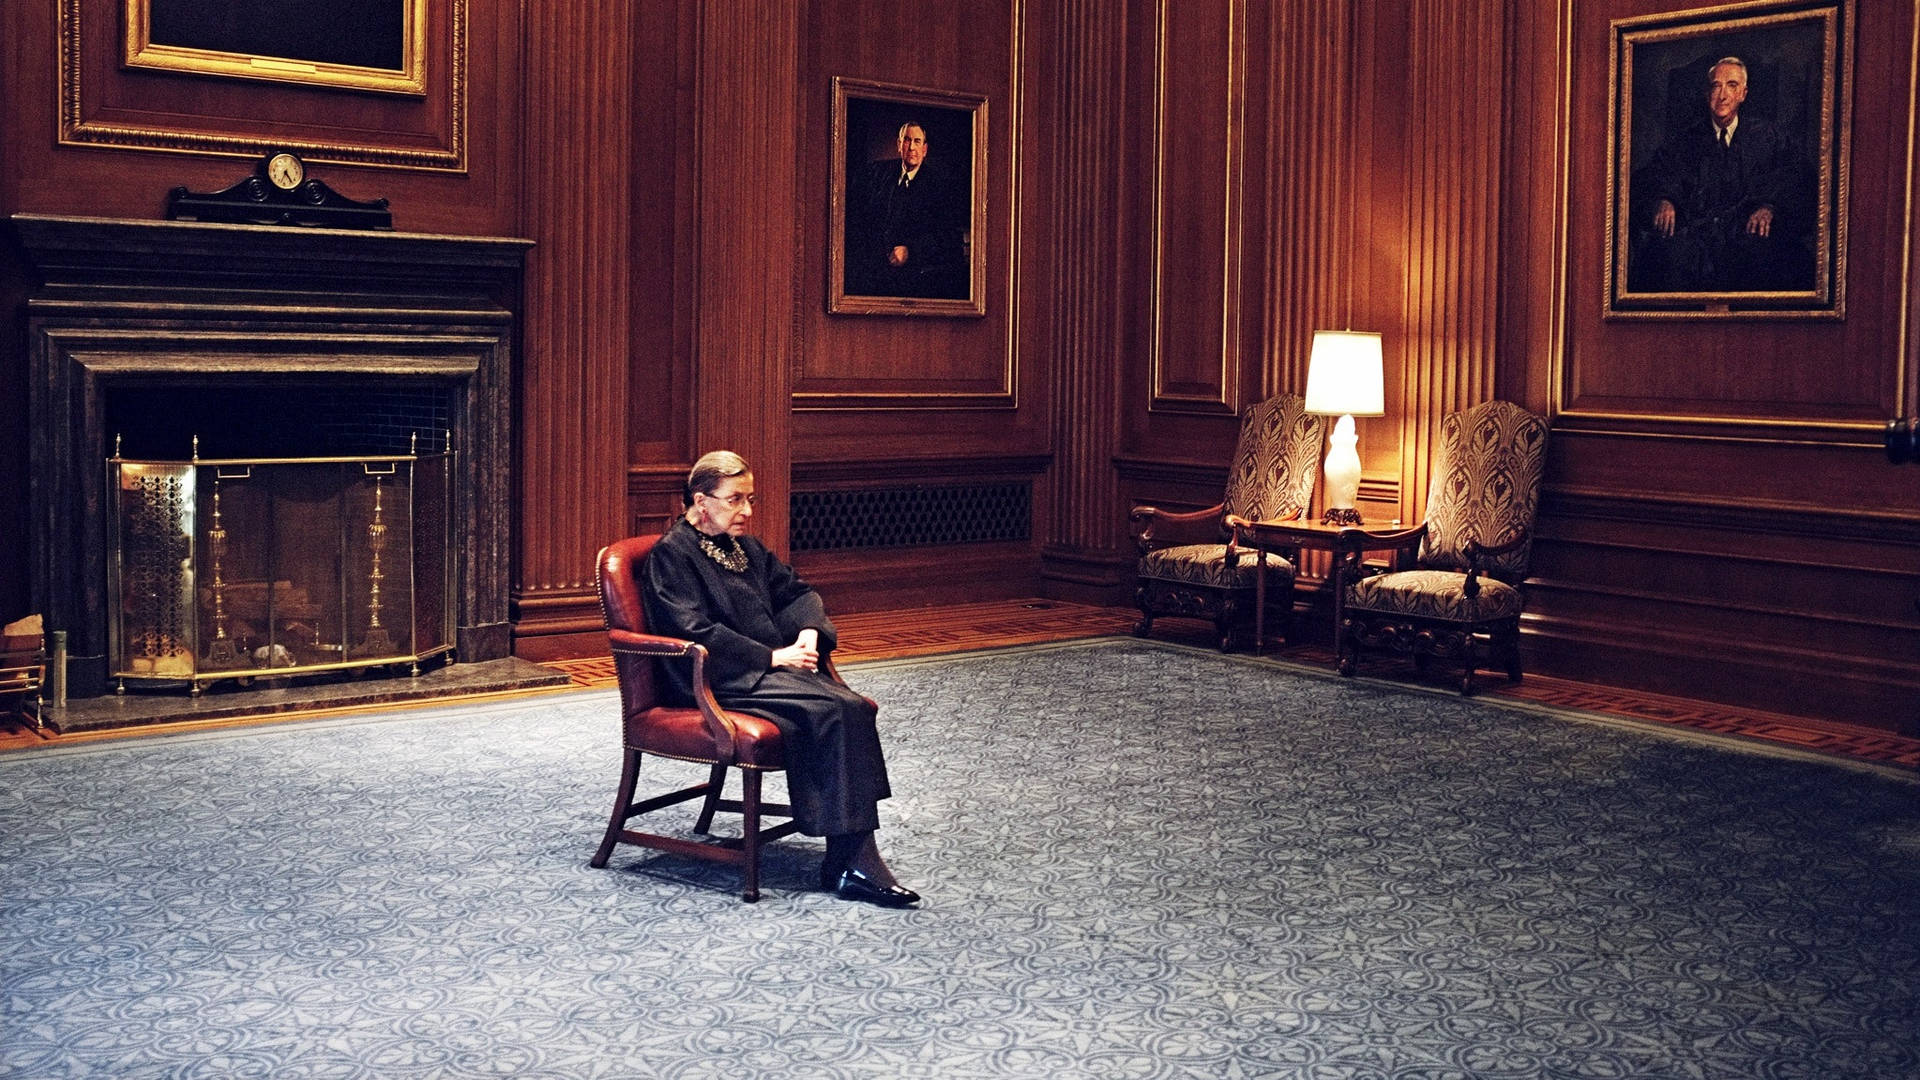 Ruth Bader Ginsburg Room With Paintings Background